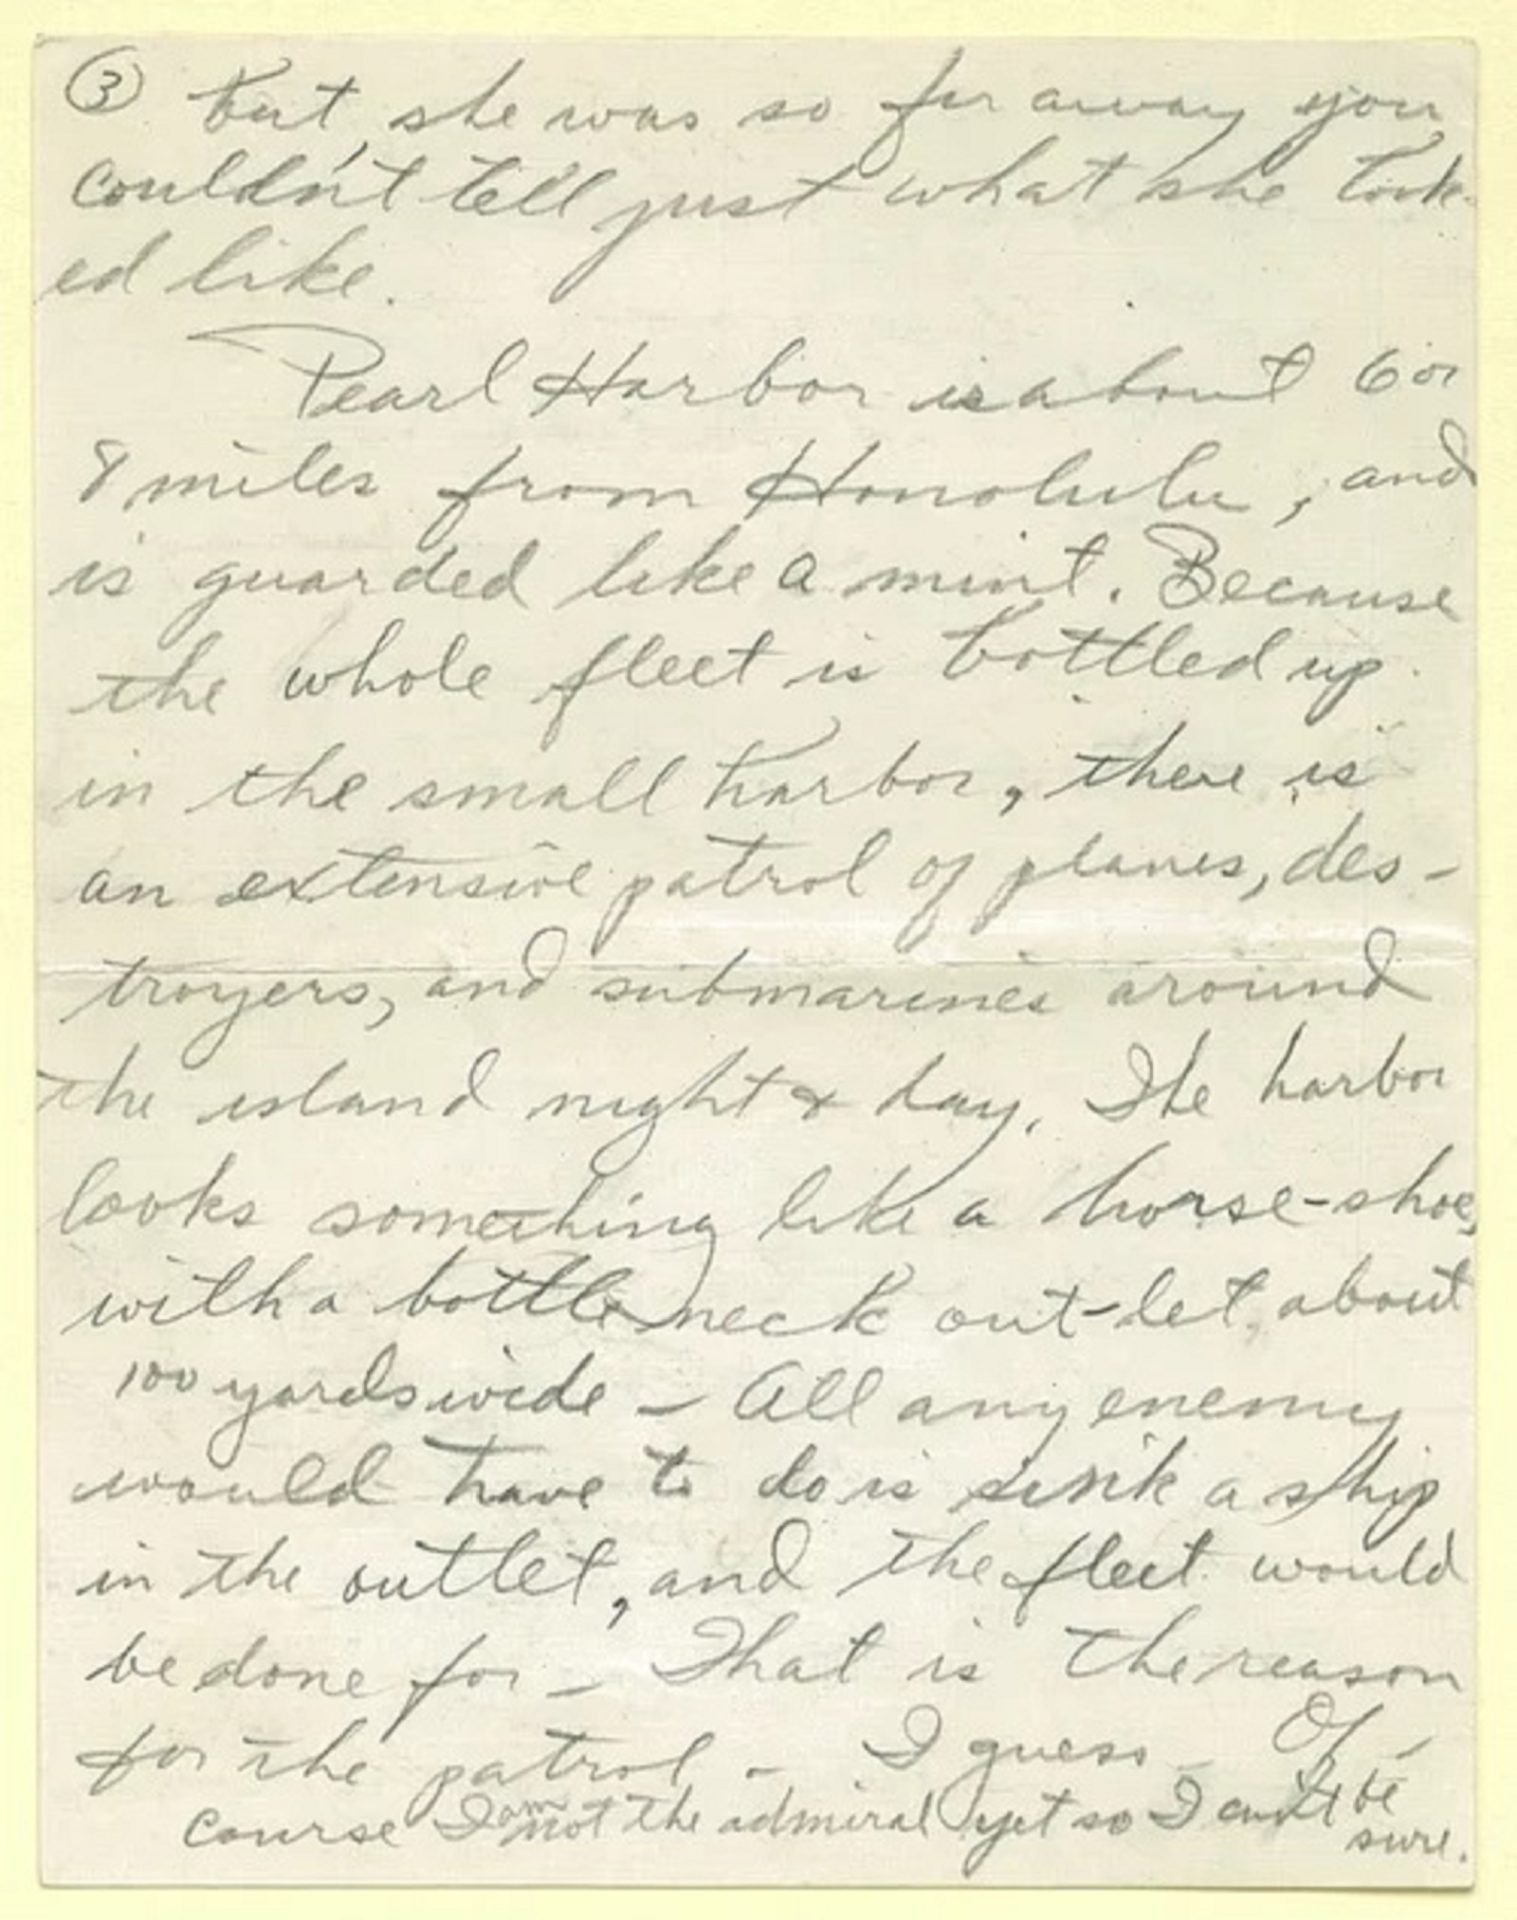 One of Bud's many letters home in 1941.